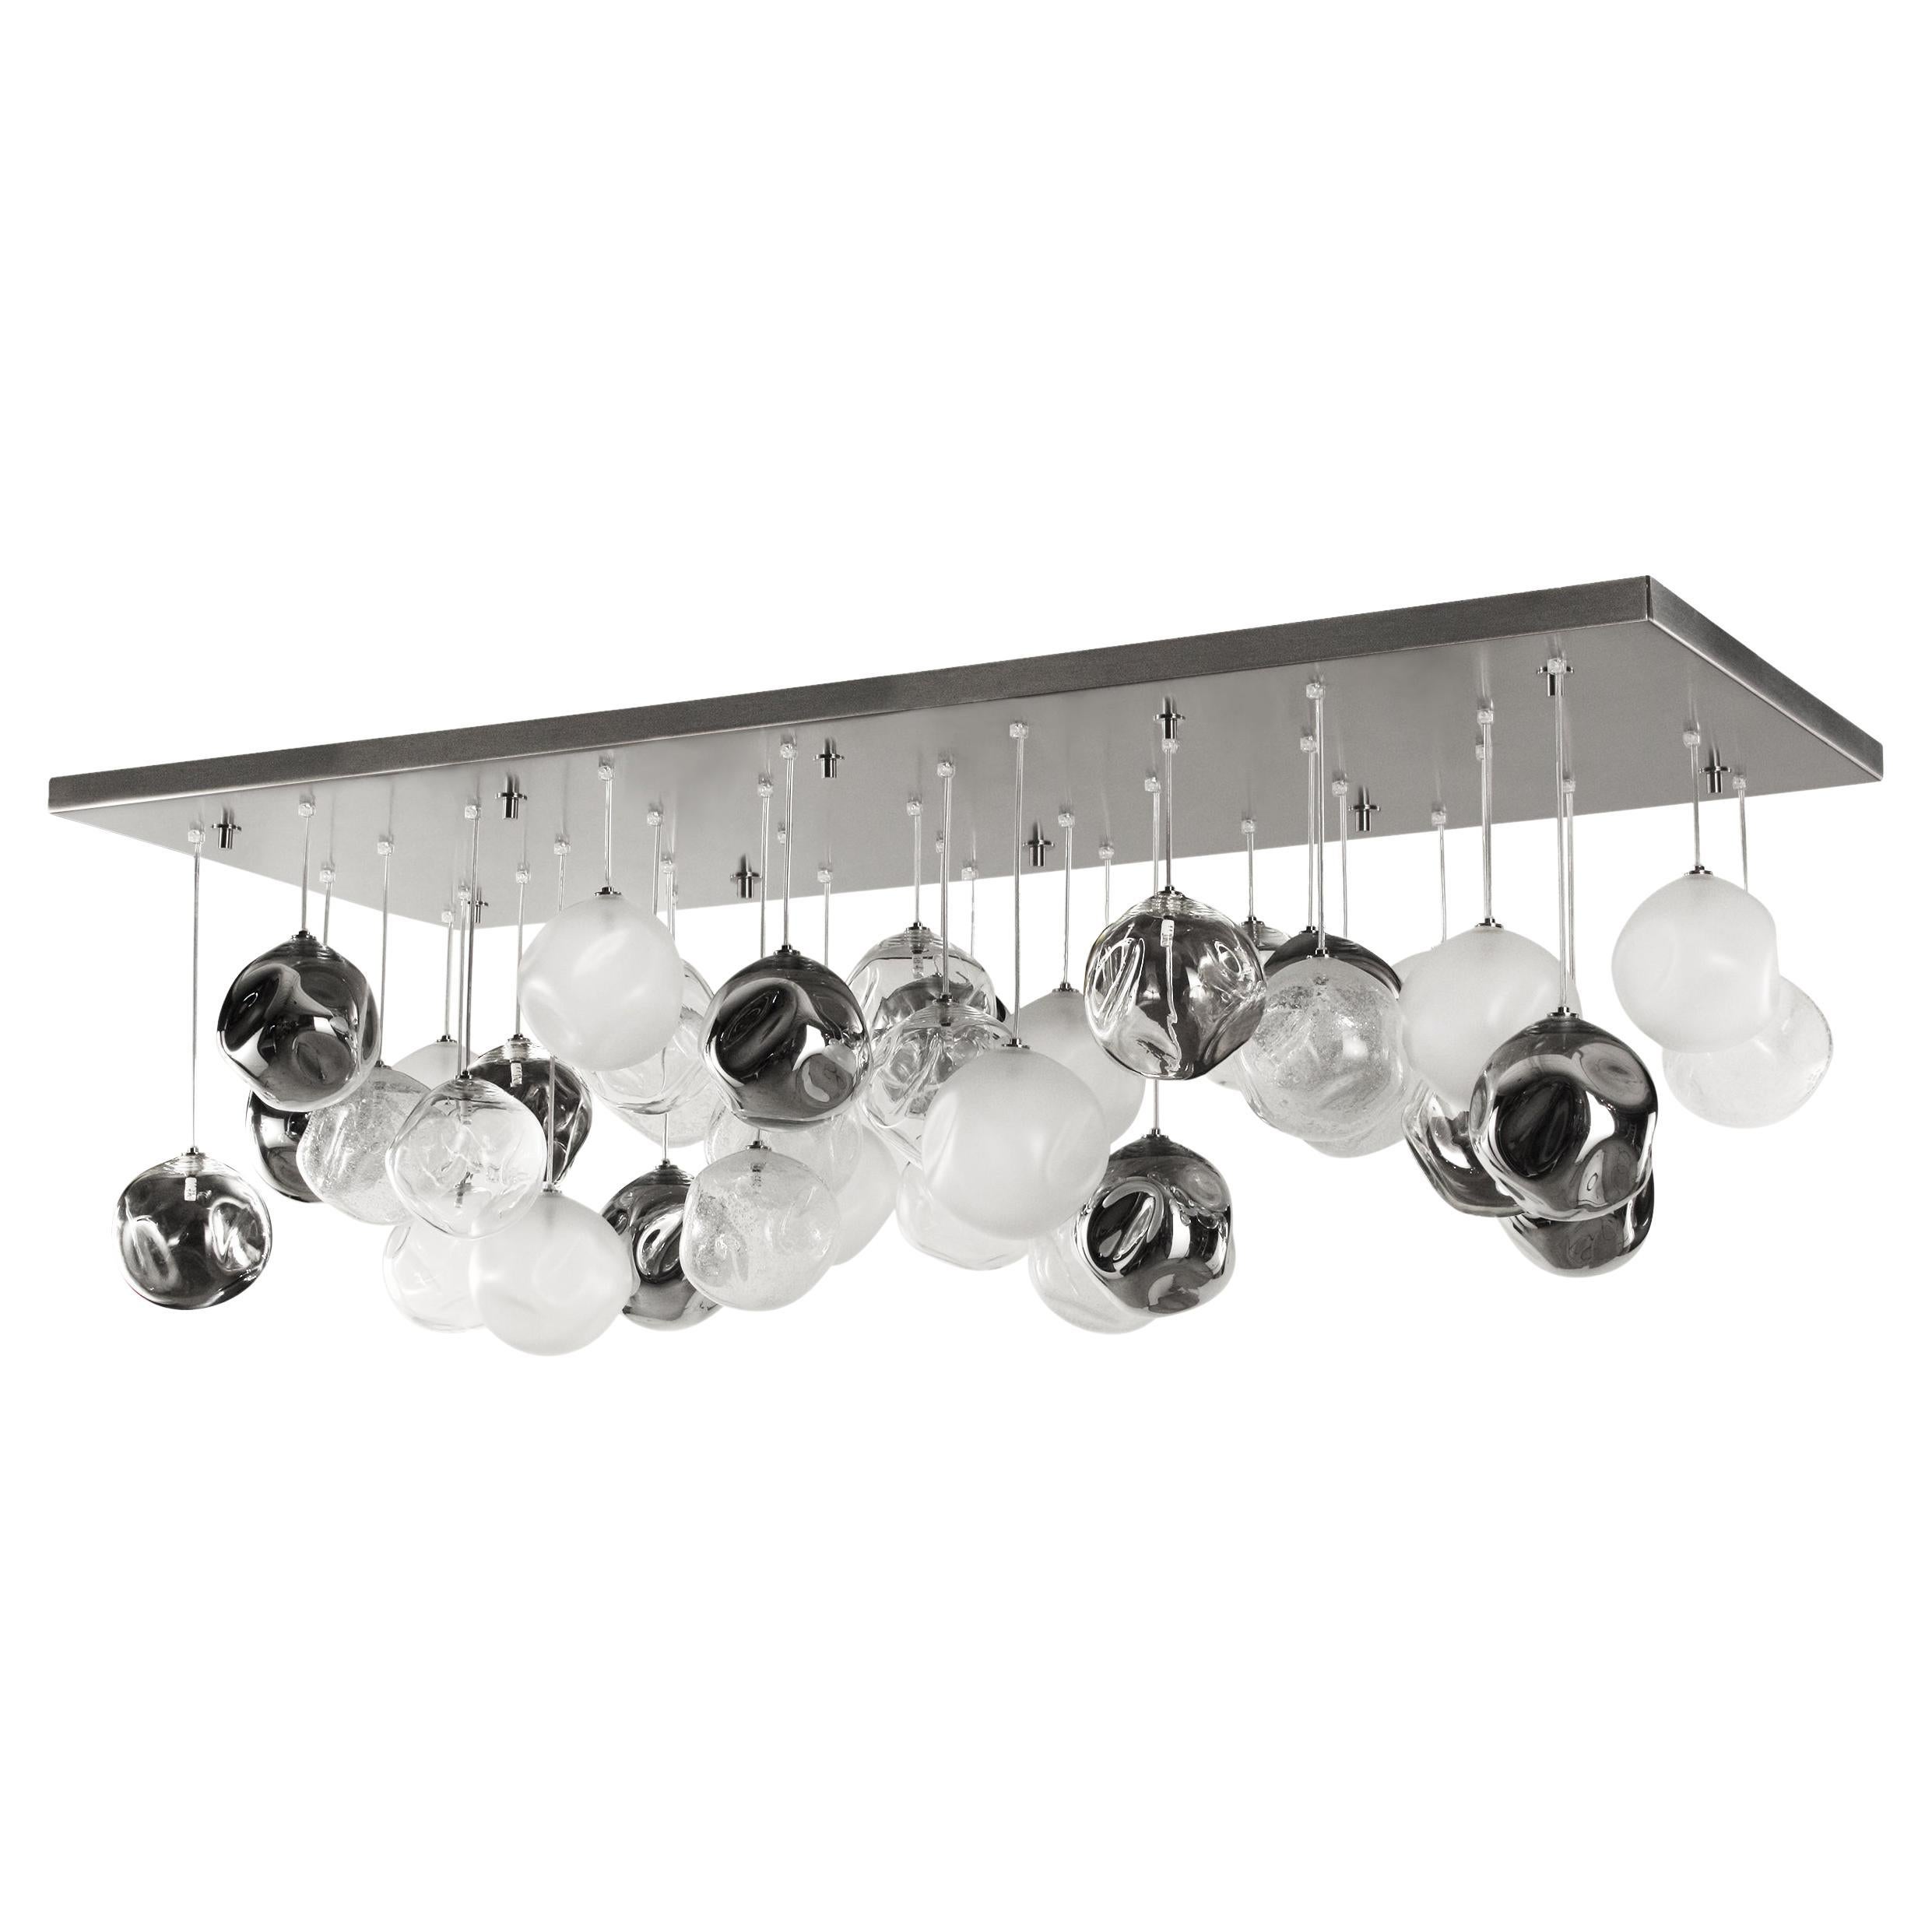 Artistic Ceiling Lighting, Spheres Clear, Satined, Mirror, Pulegoso by Multiforme For Sale